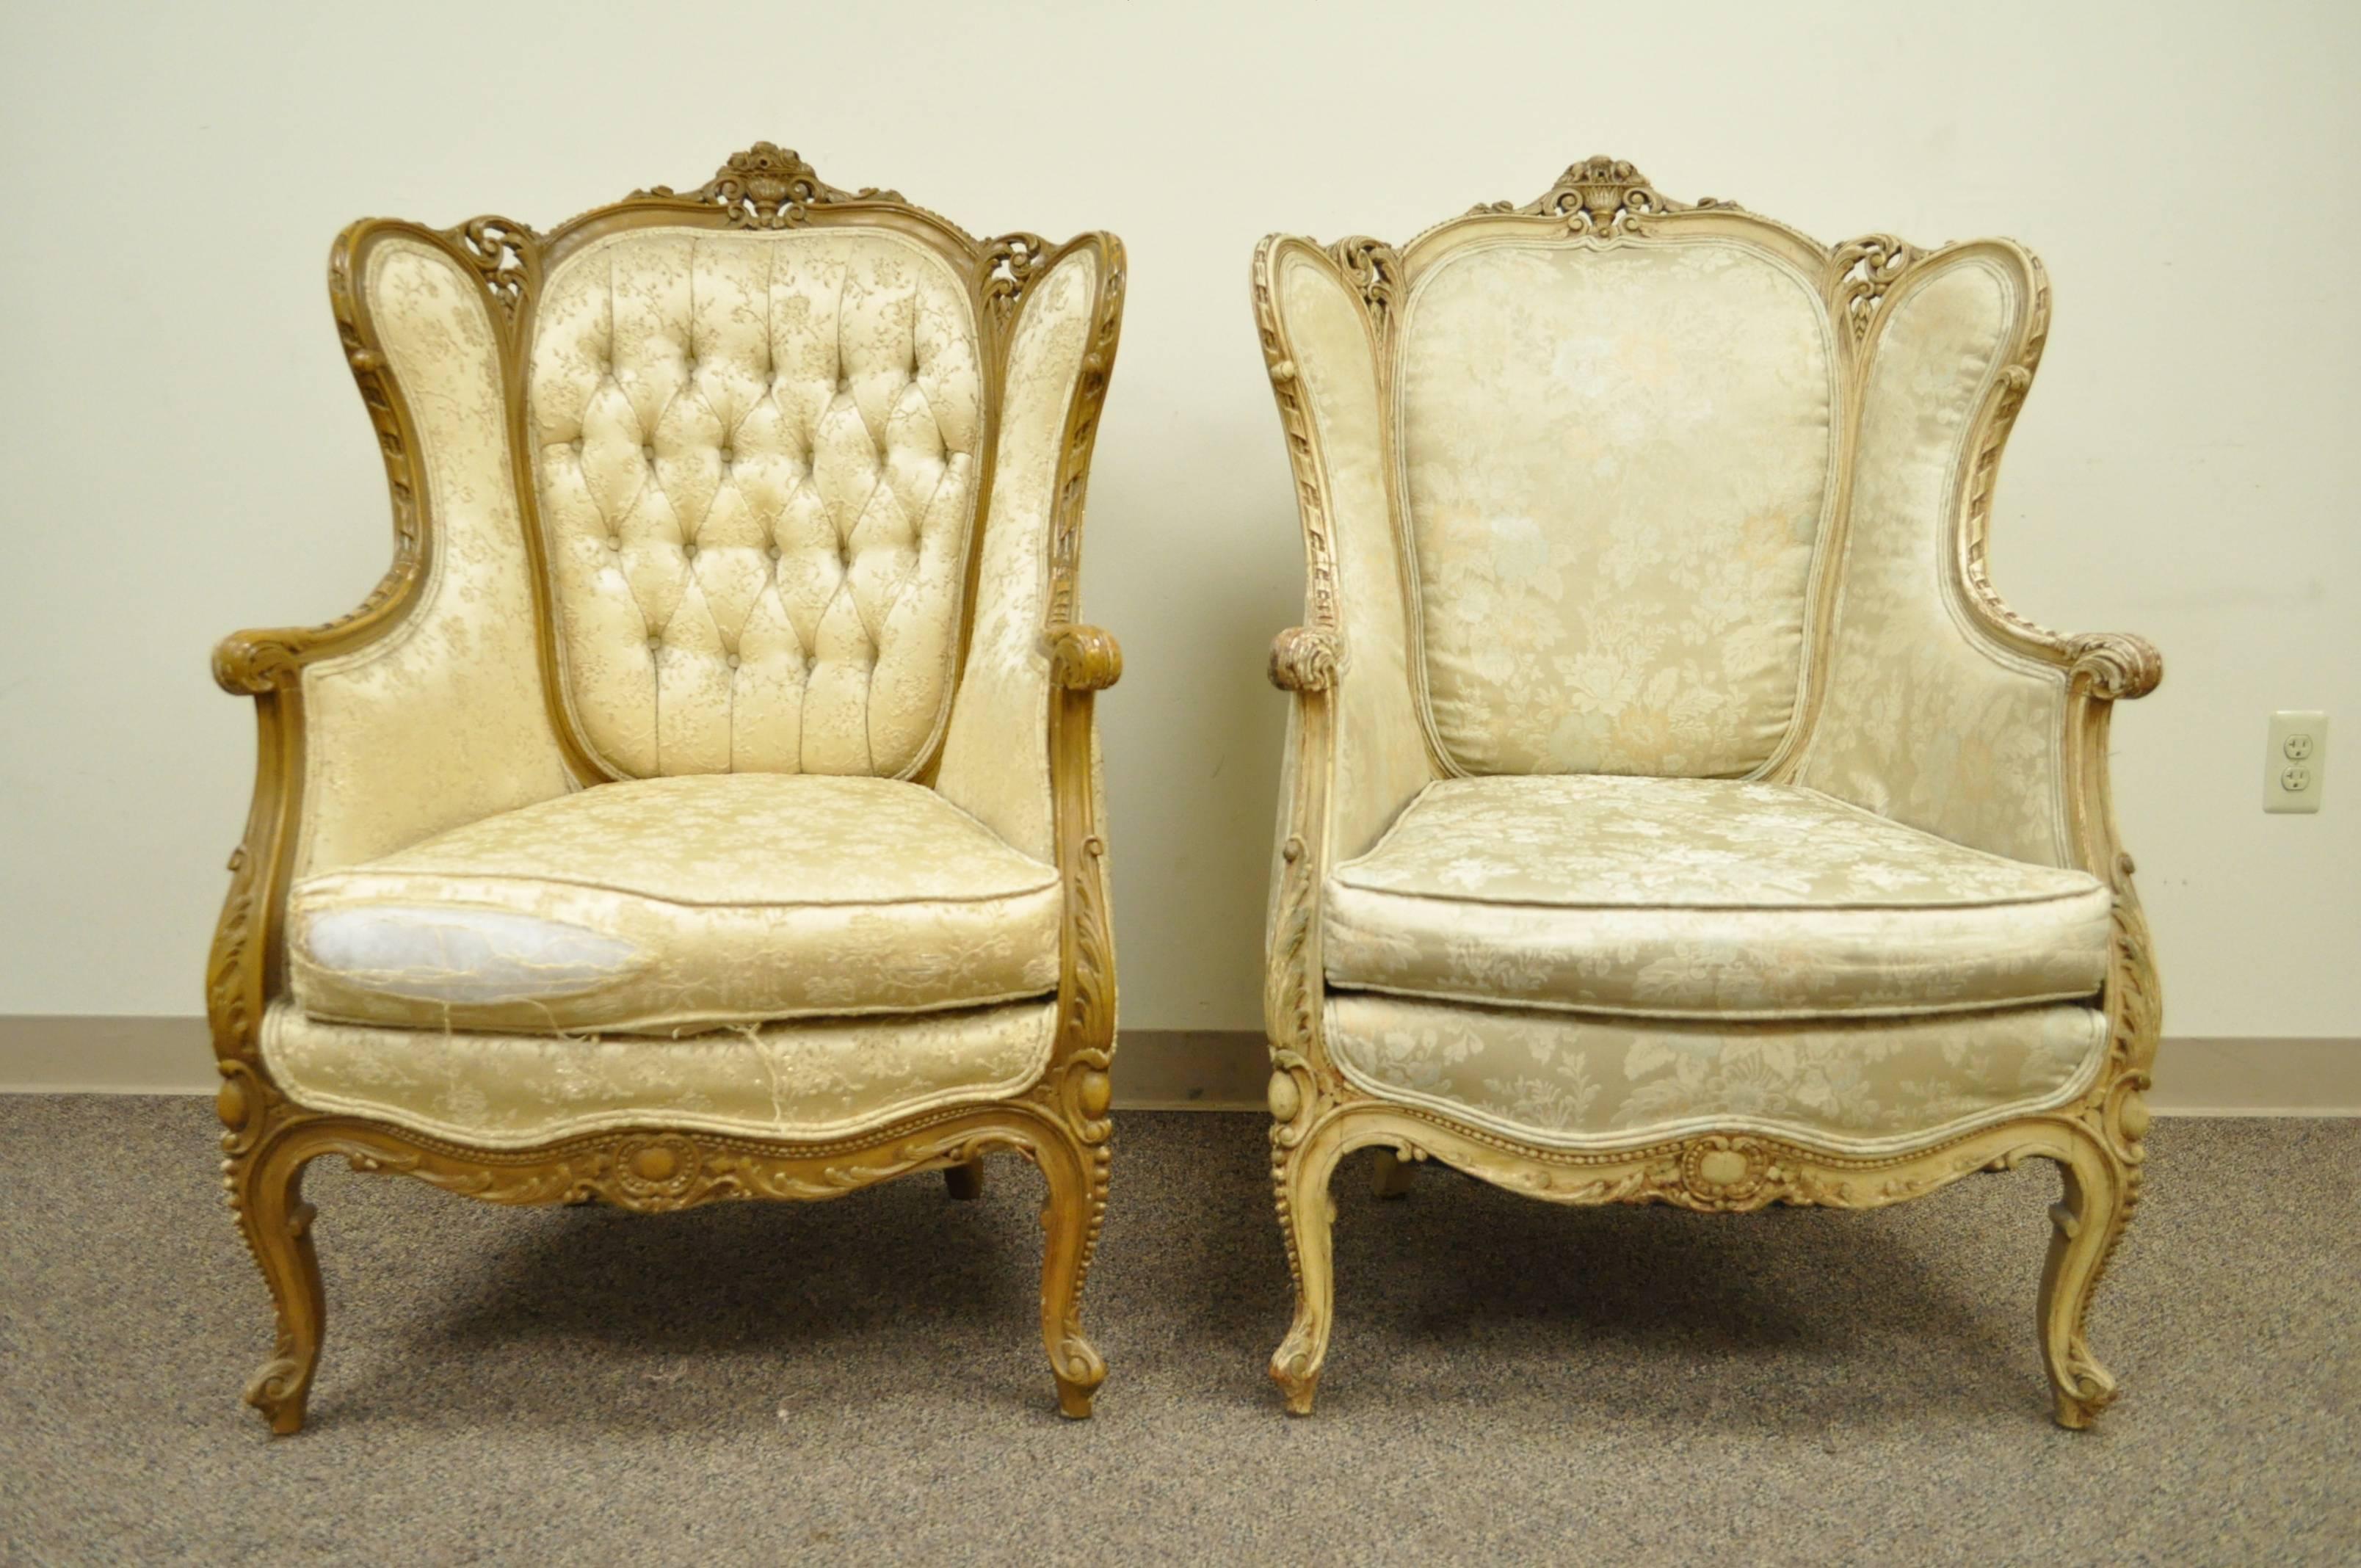 Fantastic Pair of French Bergeres from the early 20th Century. The chairs feature finely carved floral and acanthus frames, shapely cabriole legs, nice wing backs, and elegant overall form. The chairs have the same carved frames with different